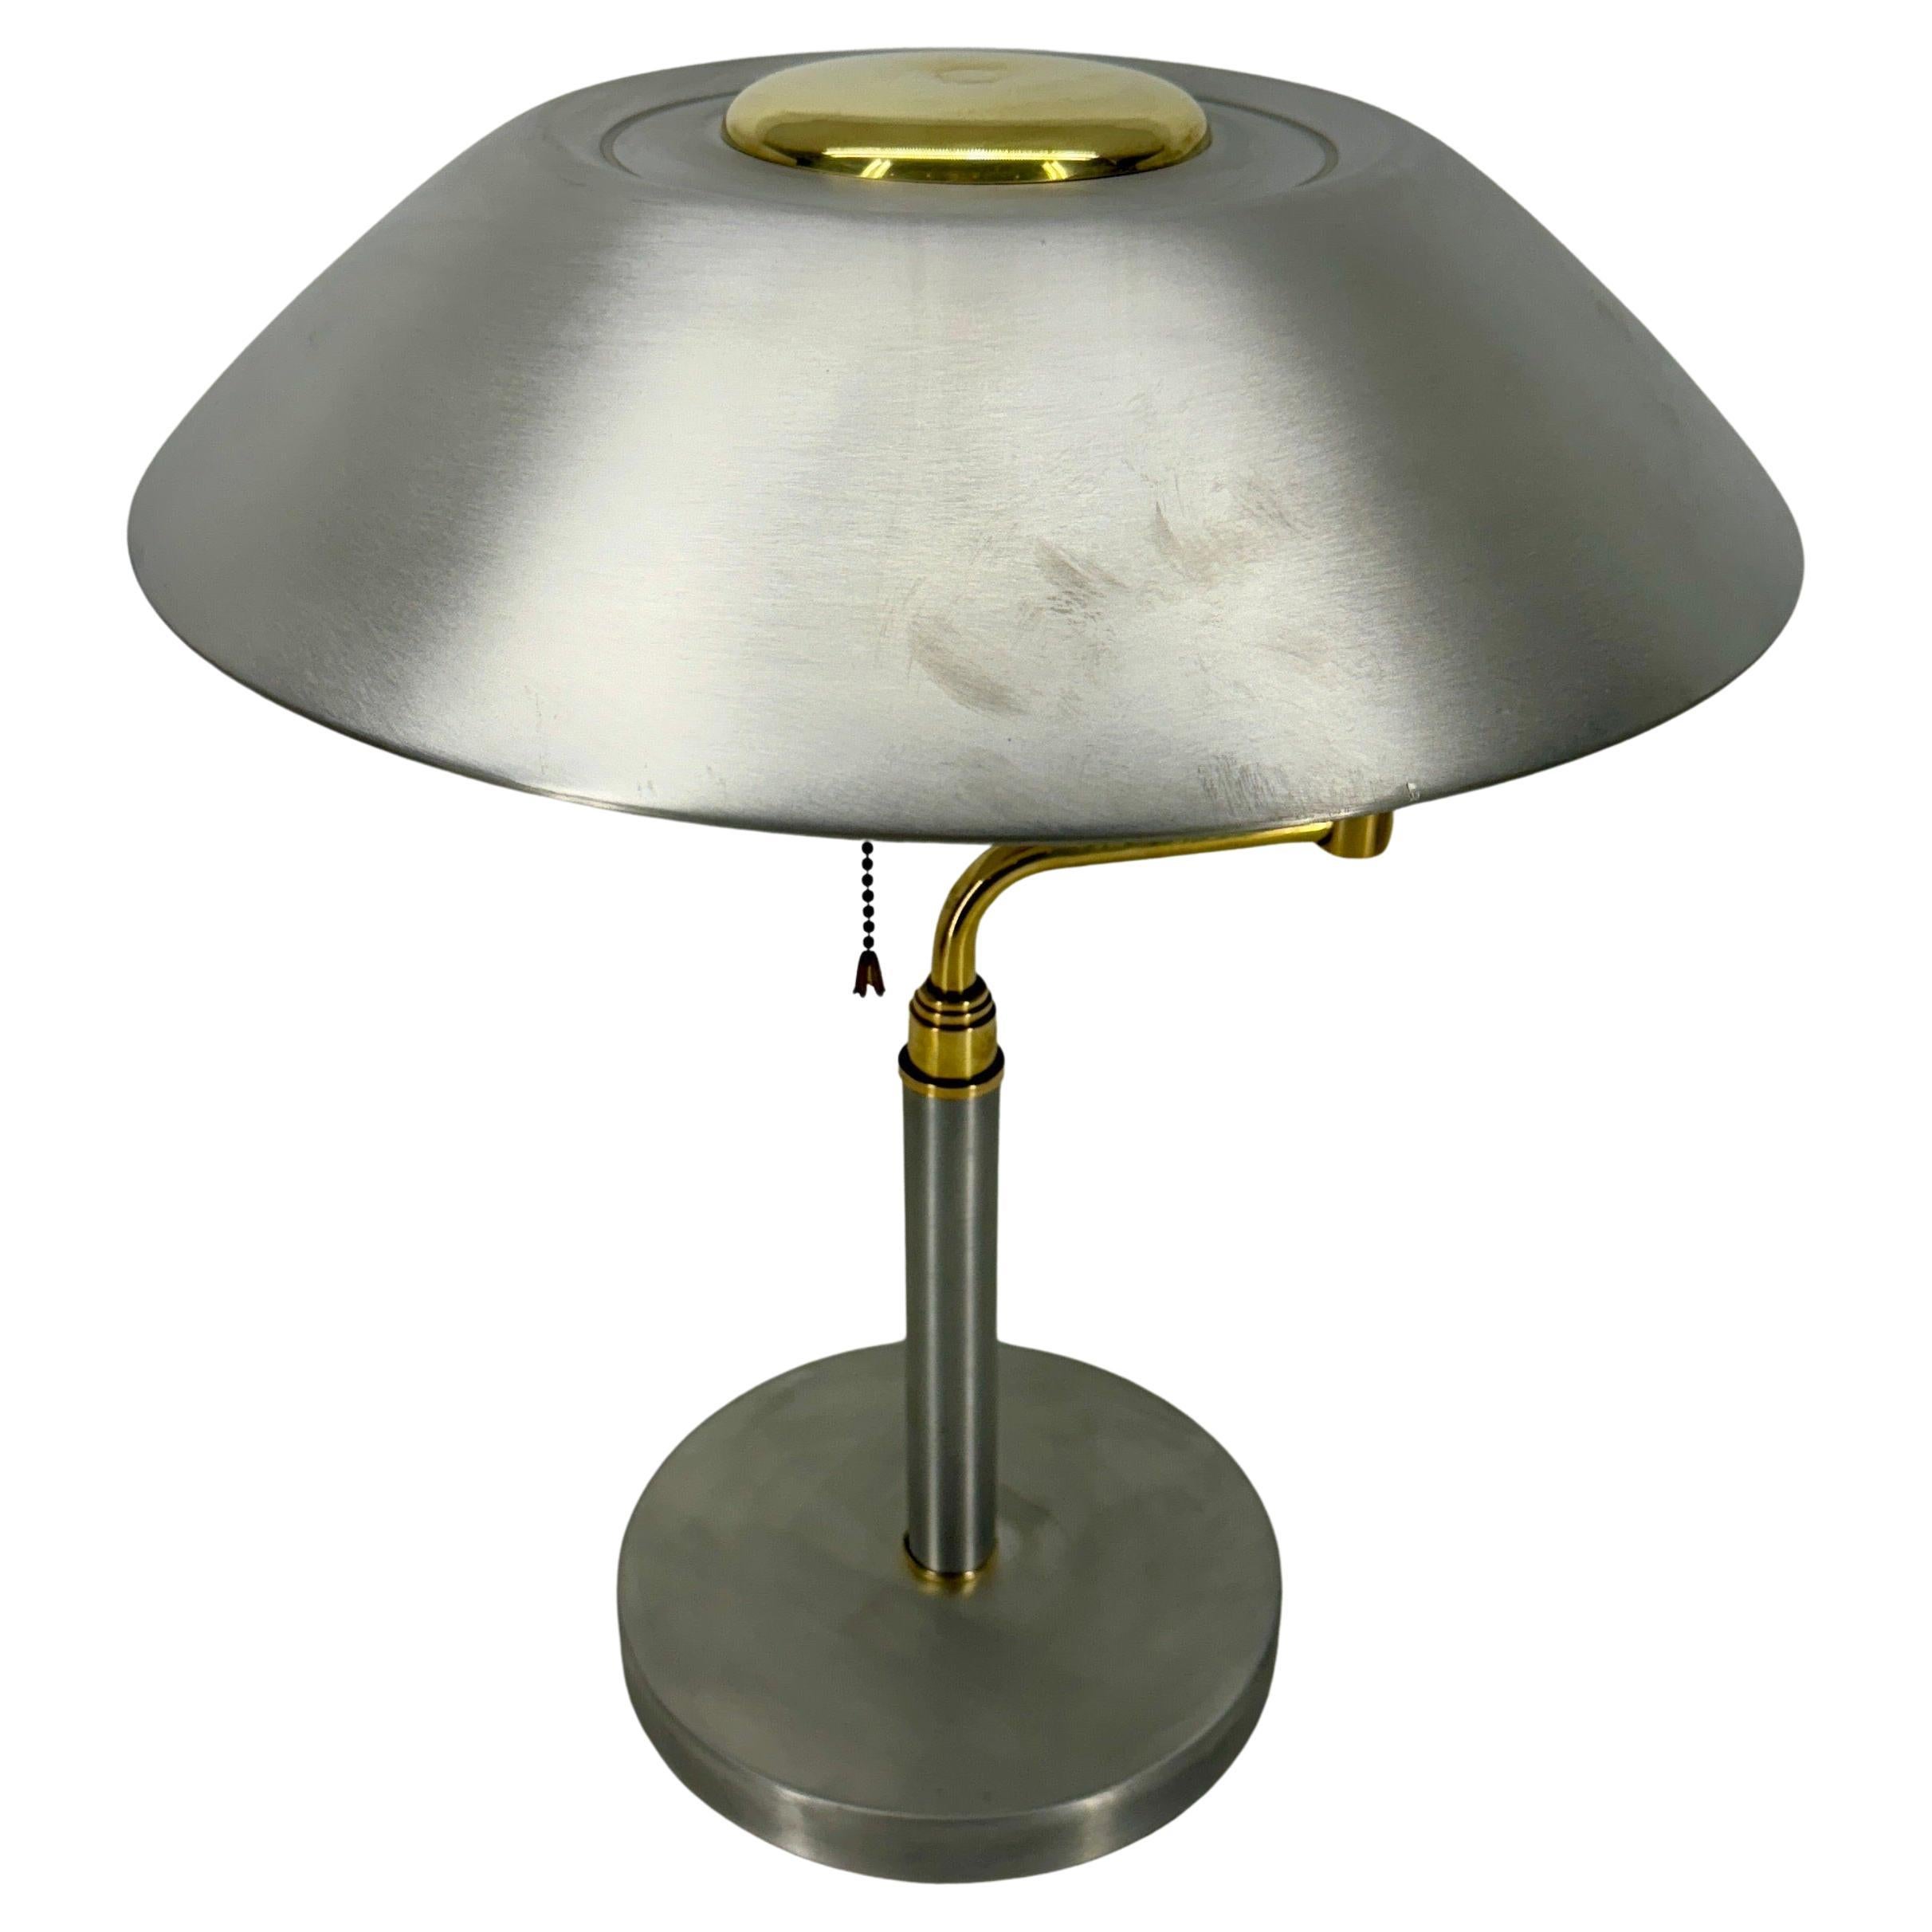 American Vintage Mid-Century Modern Desk Lamp in Aluminum and Brass  For Sale 2